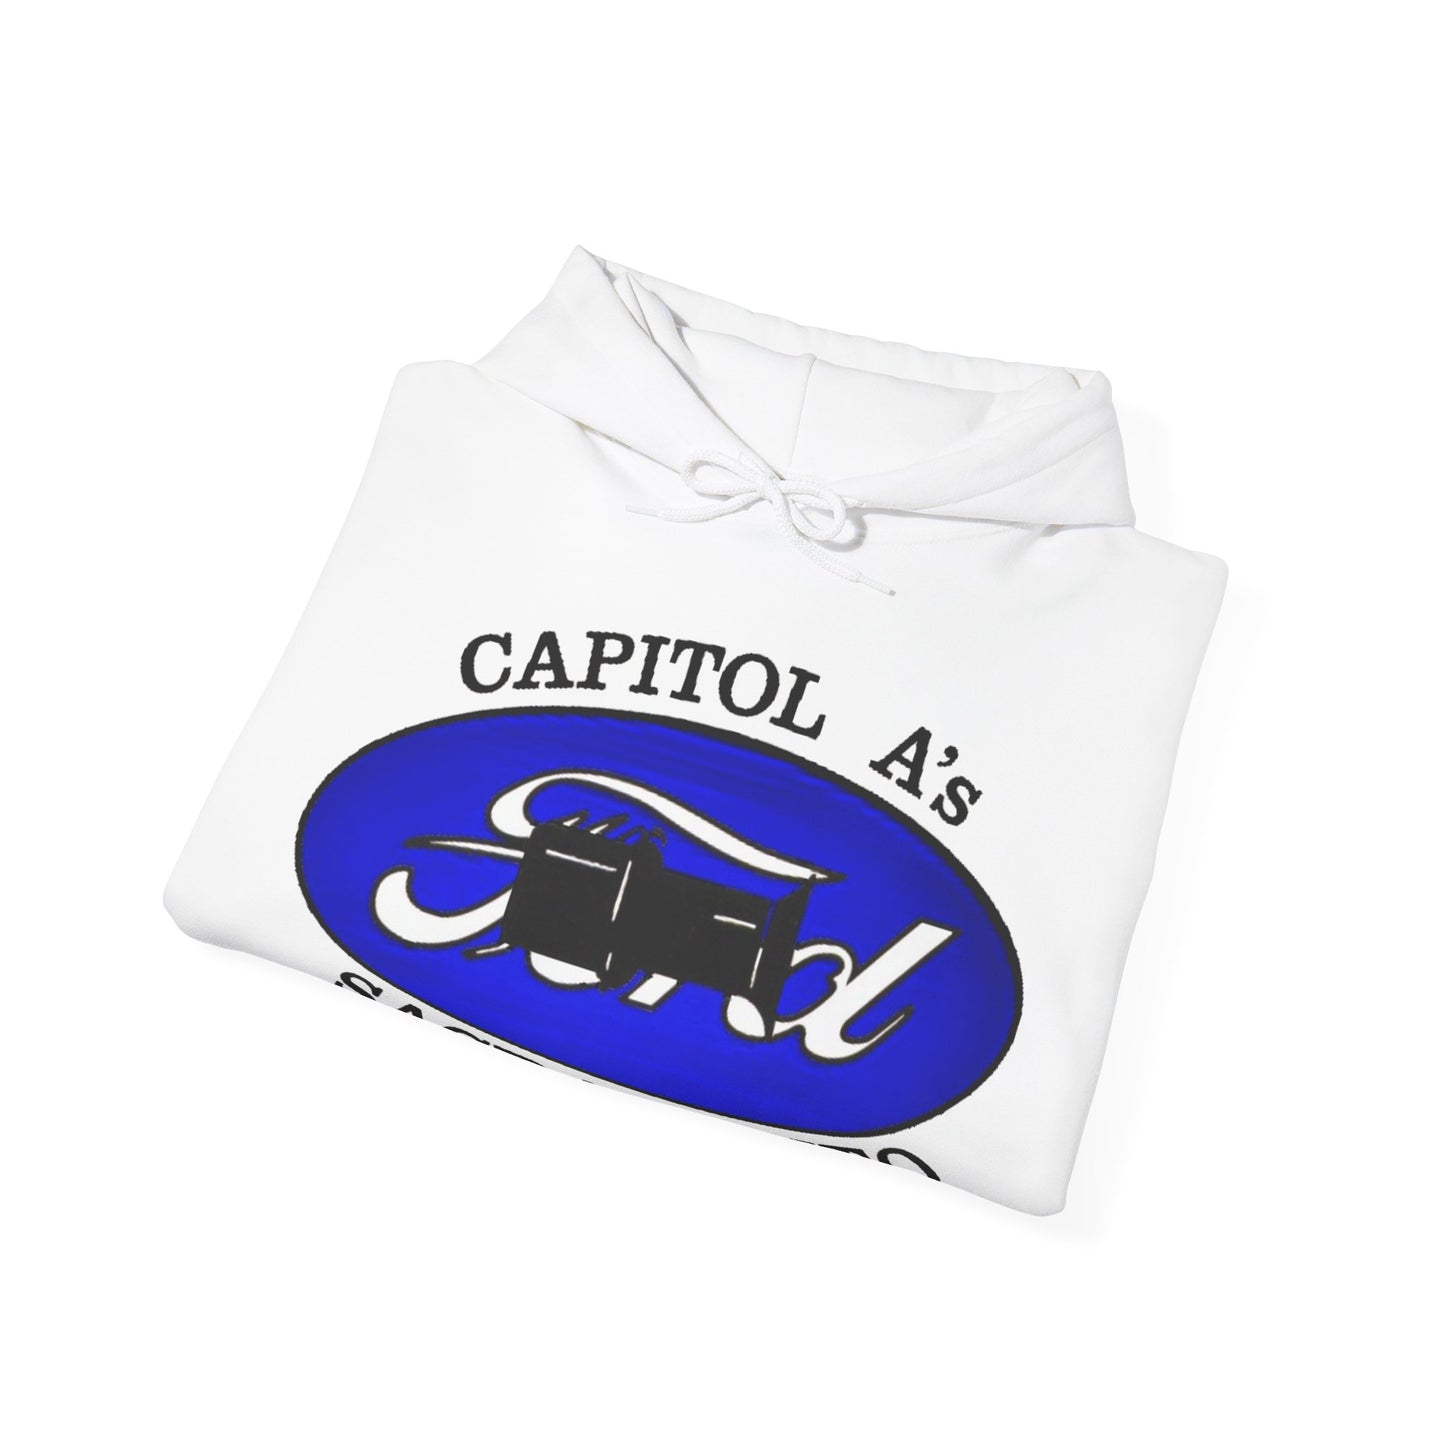 Capitol A's (front print) Unisex Heavy Blend™ Hooded Sweatshirt